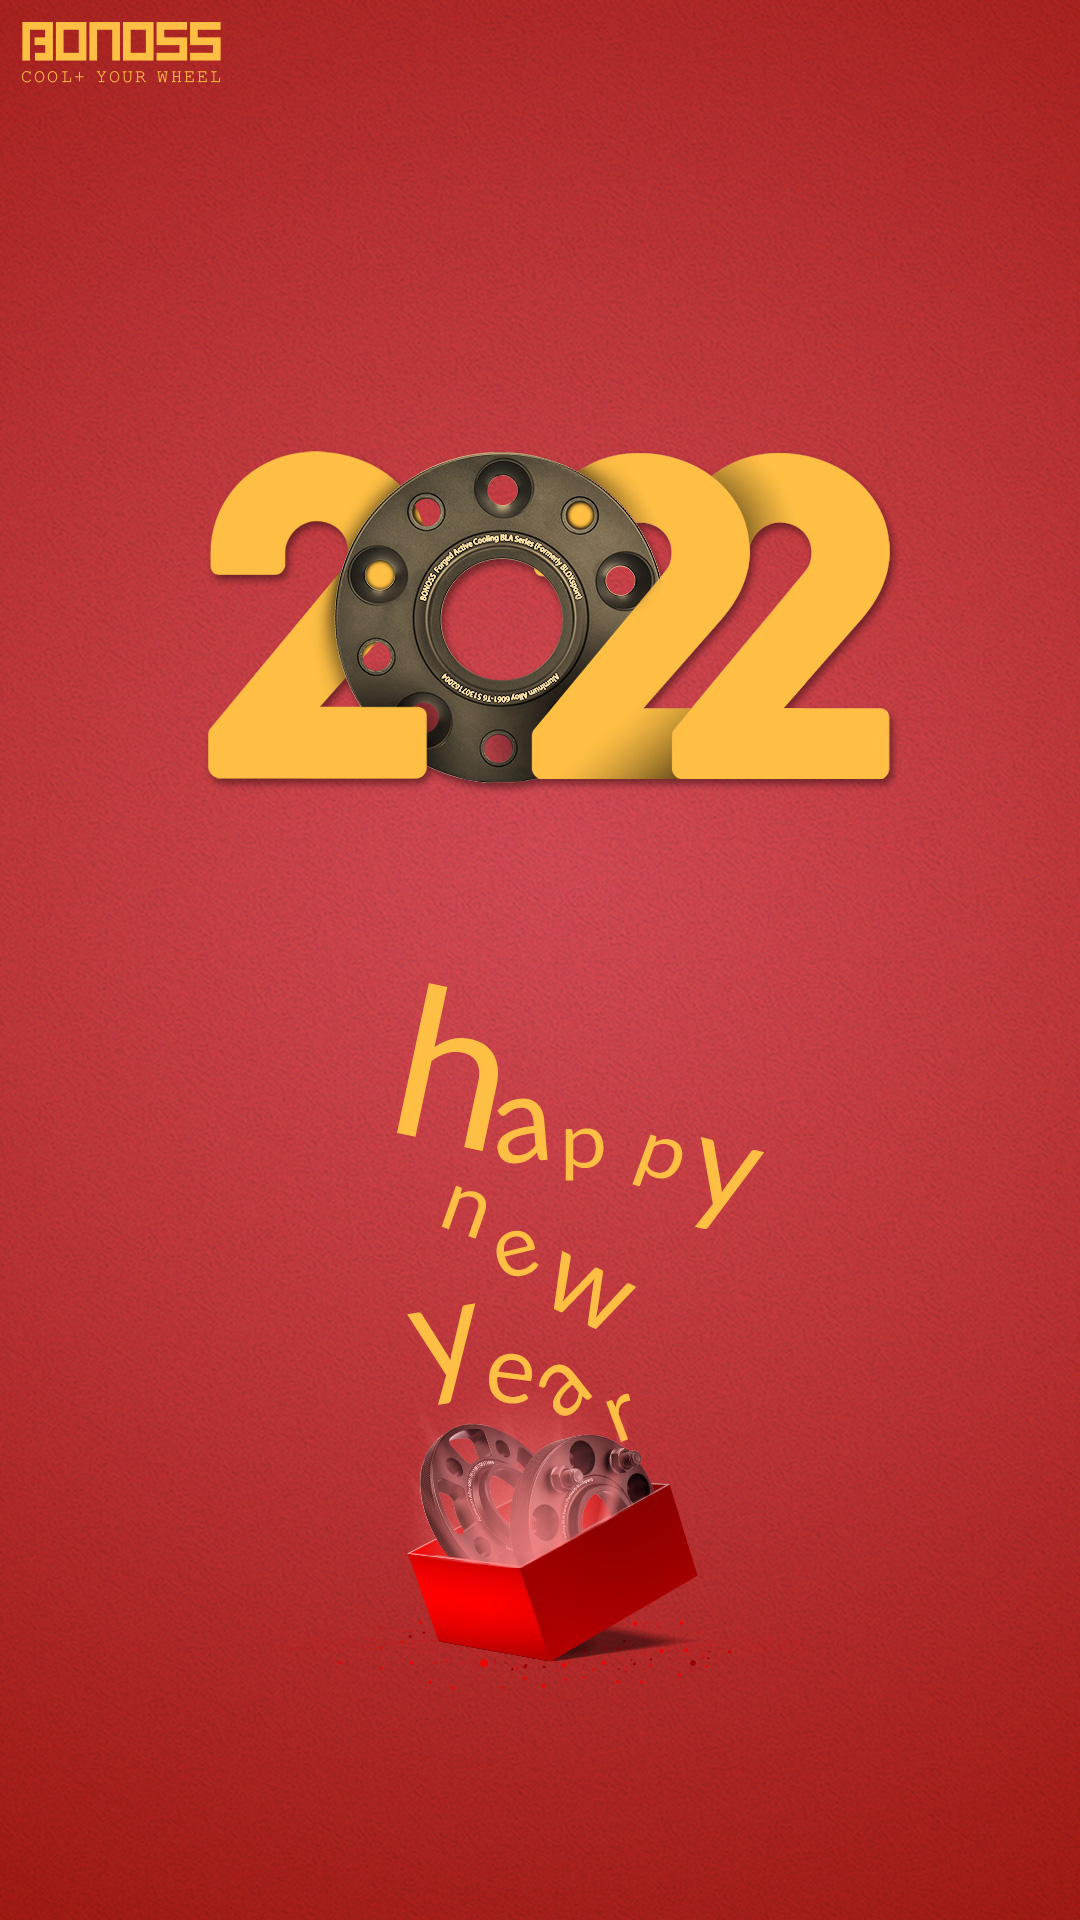 Happy New Year 2022, Things To Do for for Car Decorations Custom Car Bolt Kit Wheel Spacers Wheel Adapters Wheel Bolts